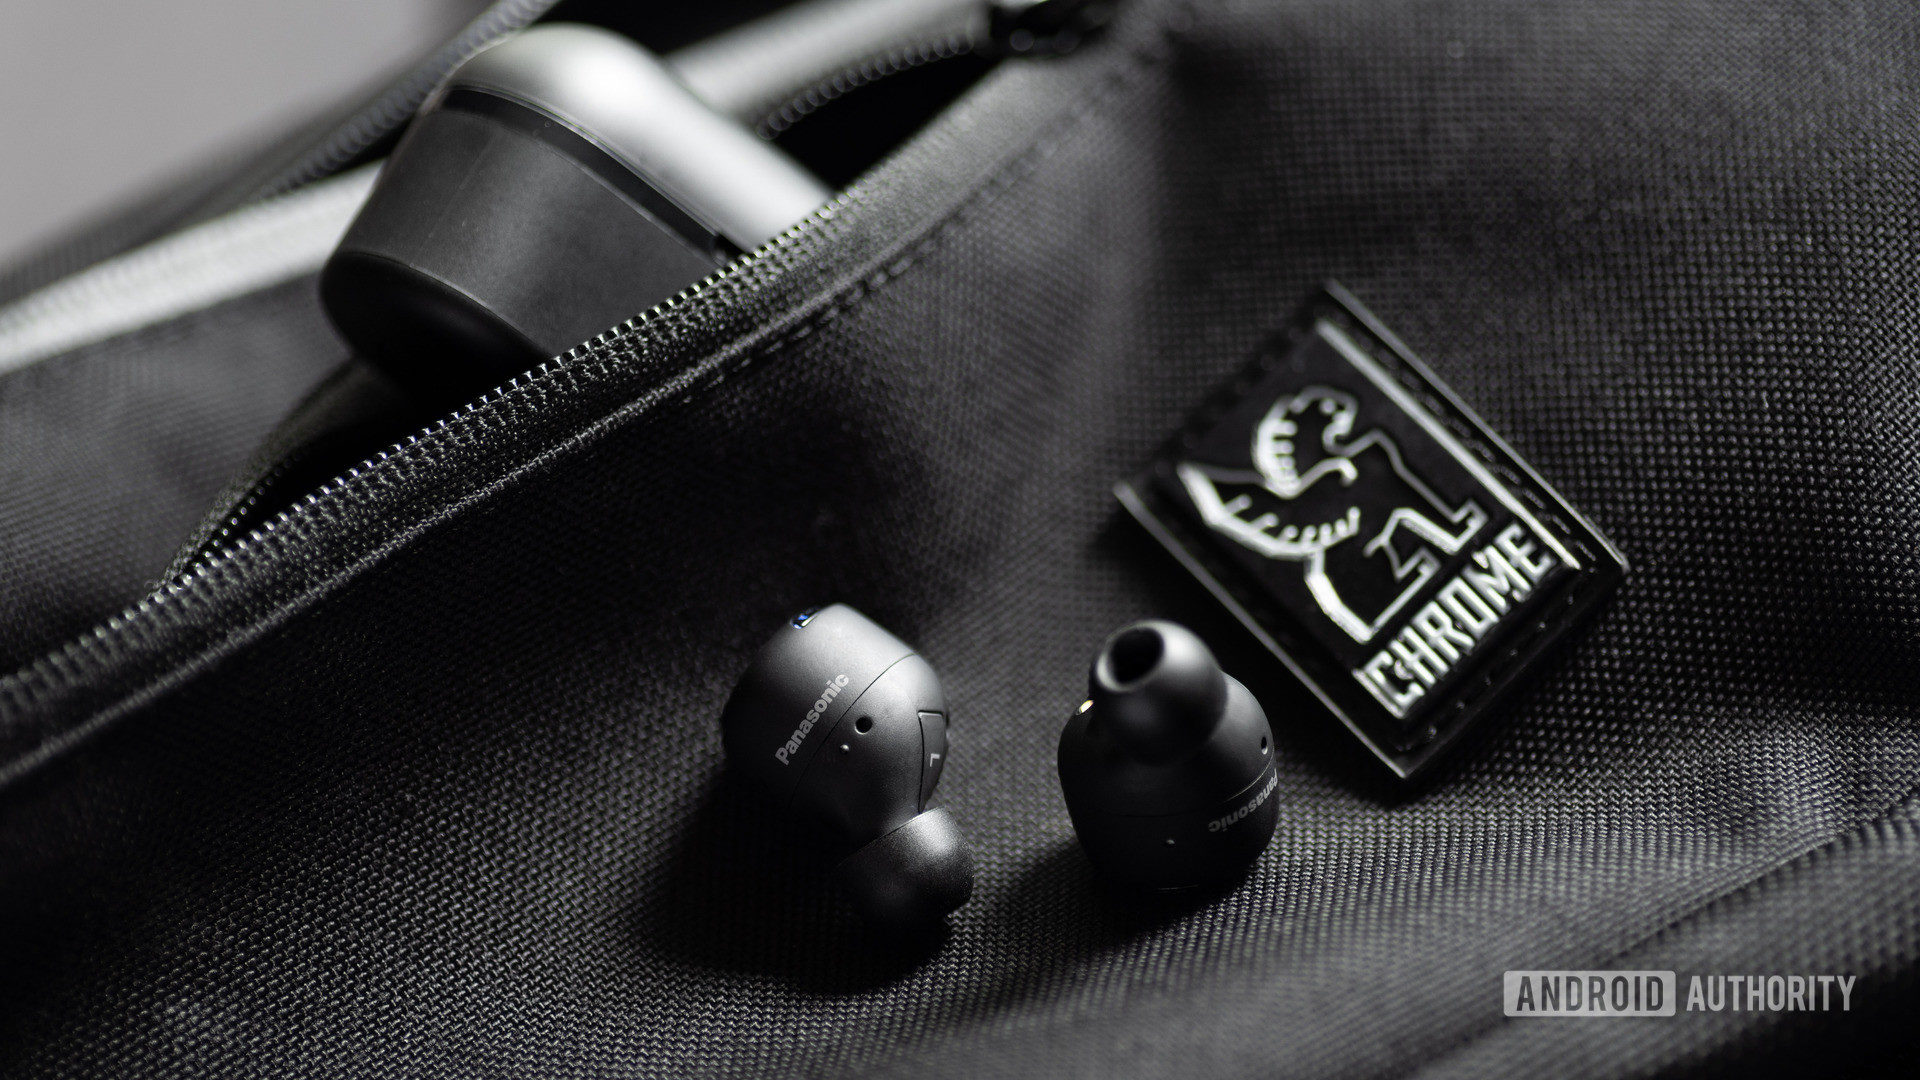 A picture of the Panasonic RZ-S500W noise cancelling earbuds on a Chrome sling bag with the case angled in the zippered pocket of the bag.